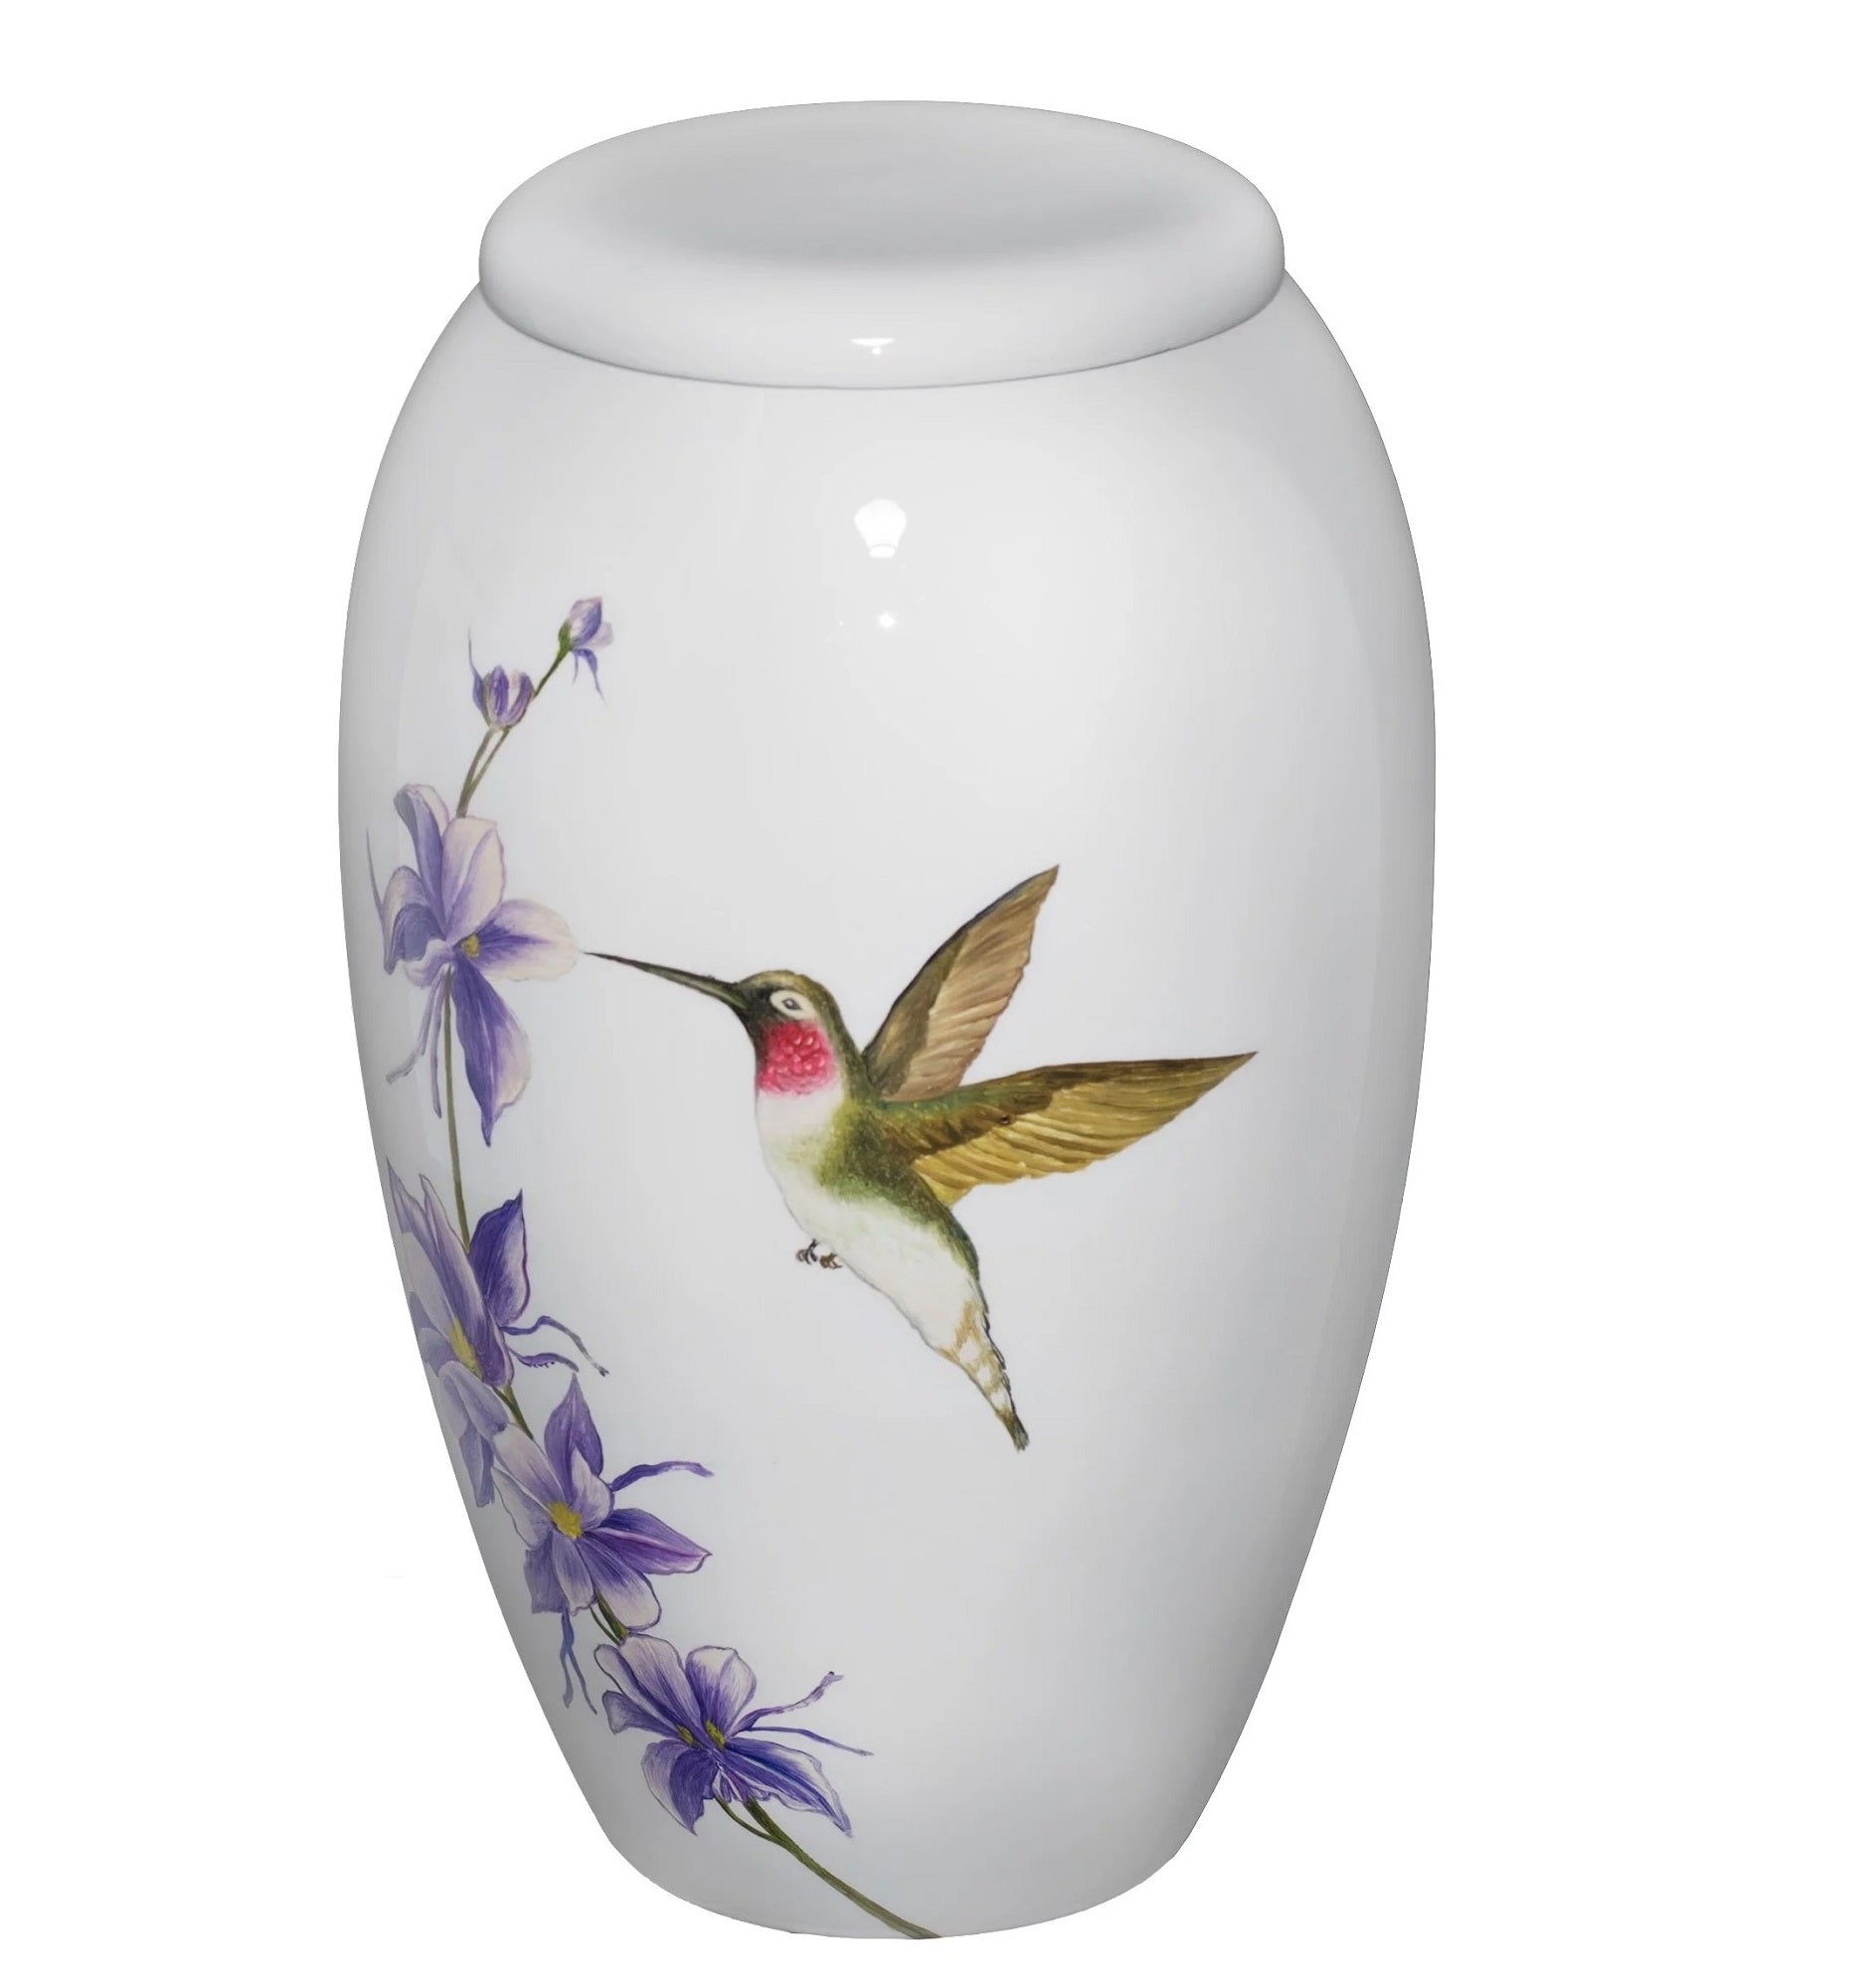 White Urn with Hummingbird and purple flowers.